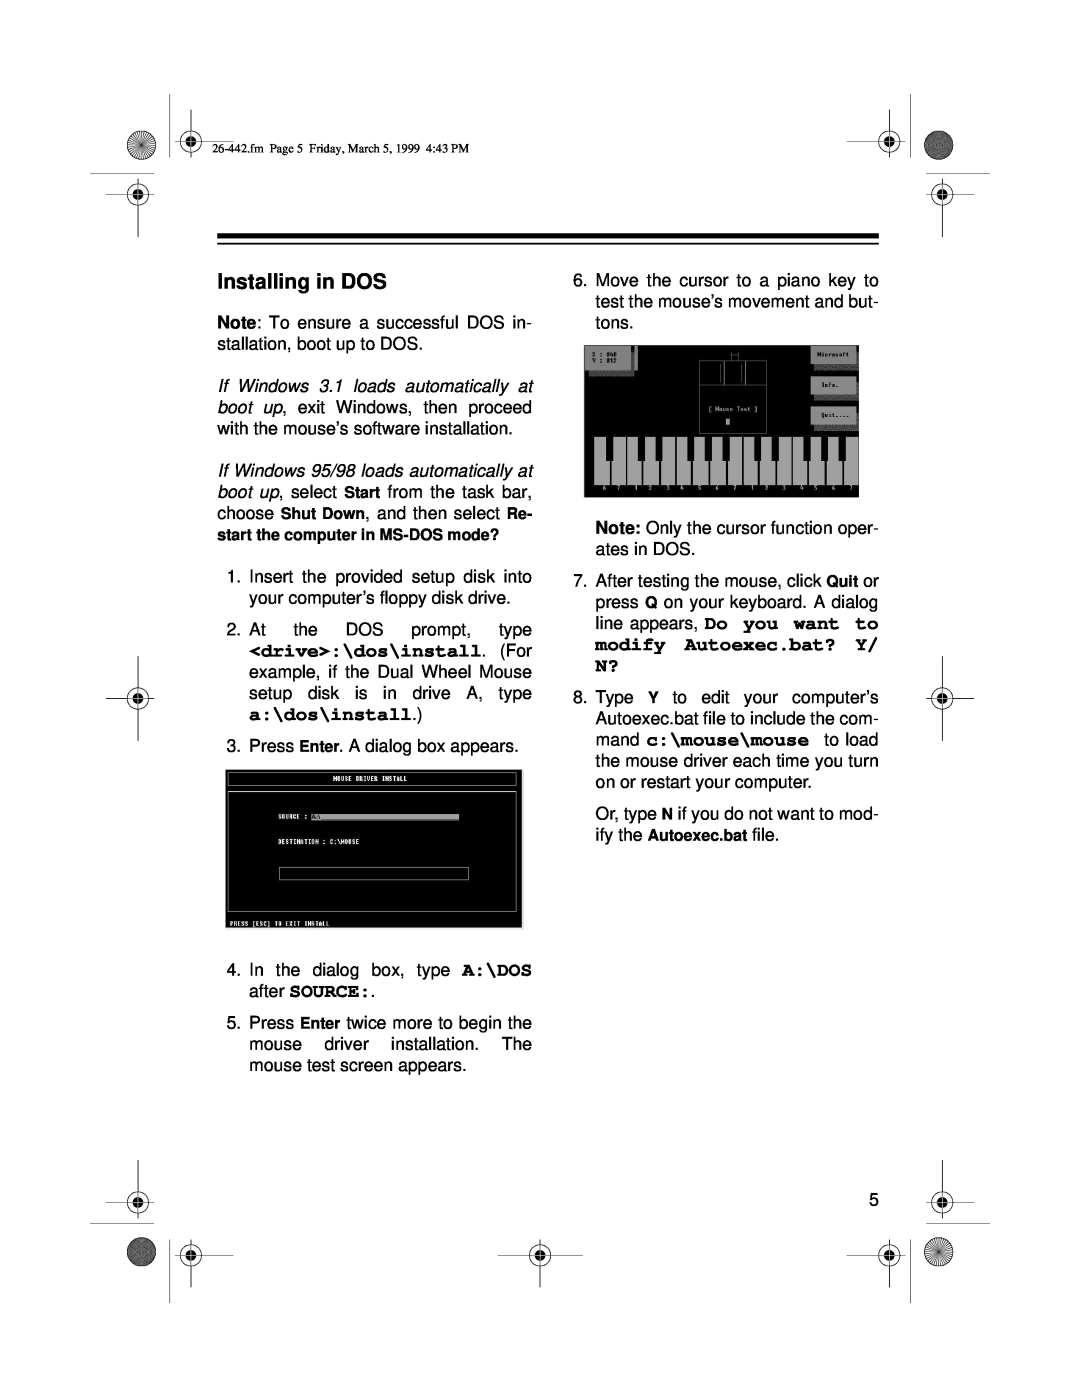 Radio Shack 26-442 owner manual Installing in DOS, start the computer in MS-DOS mode? 